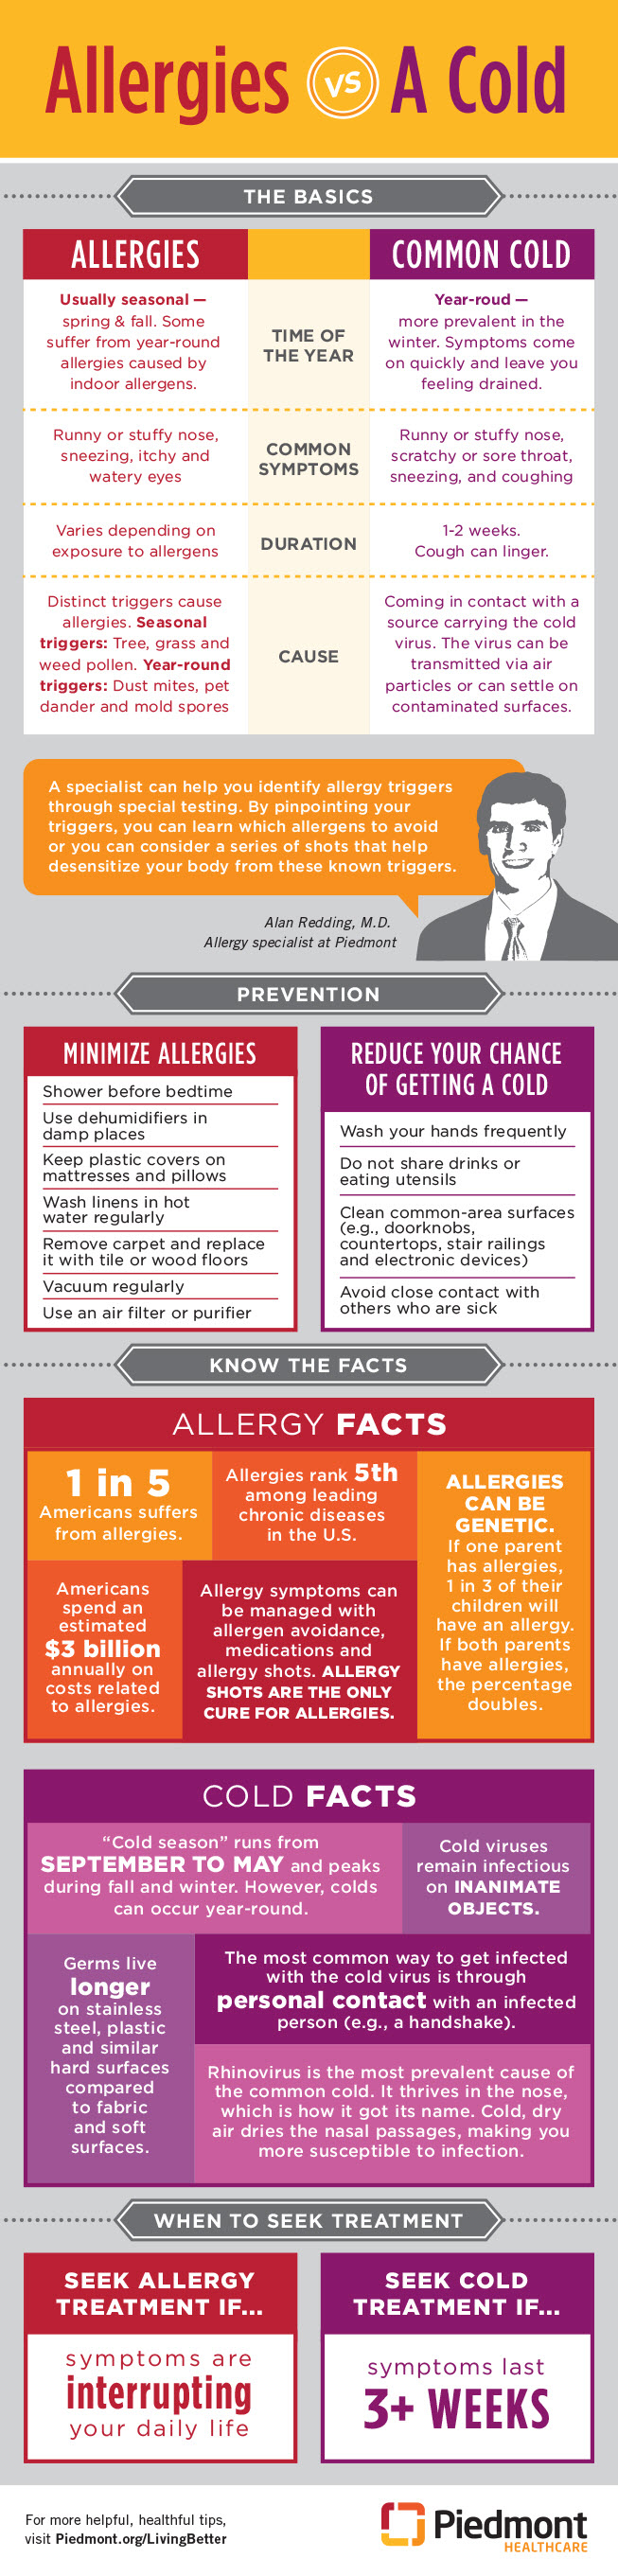 Allergies vs. a cold